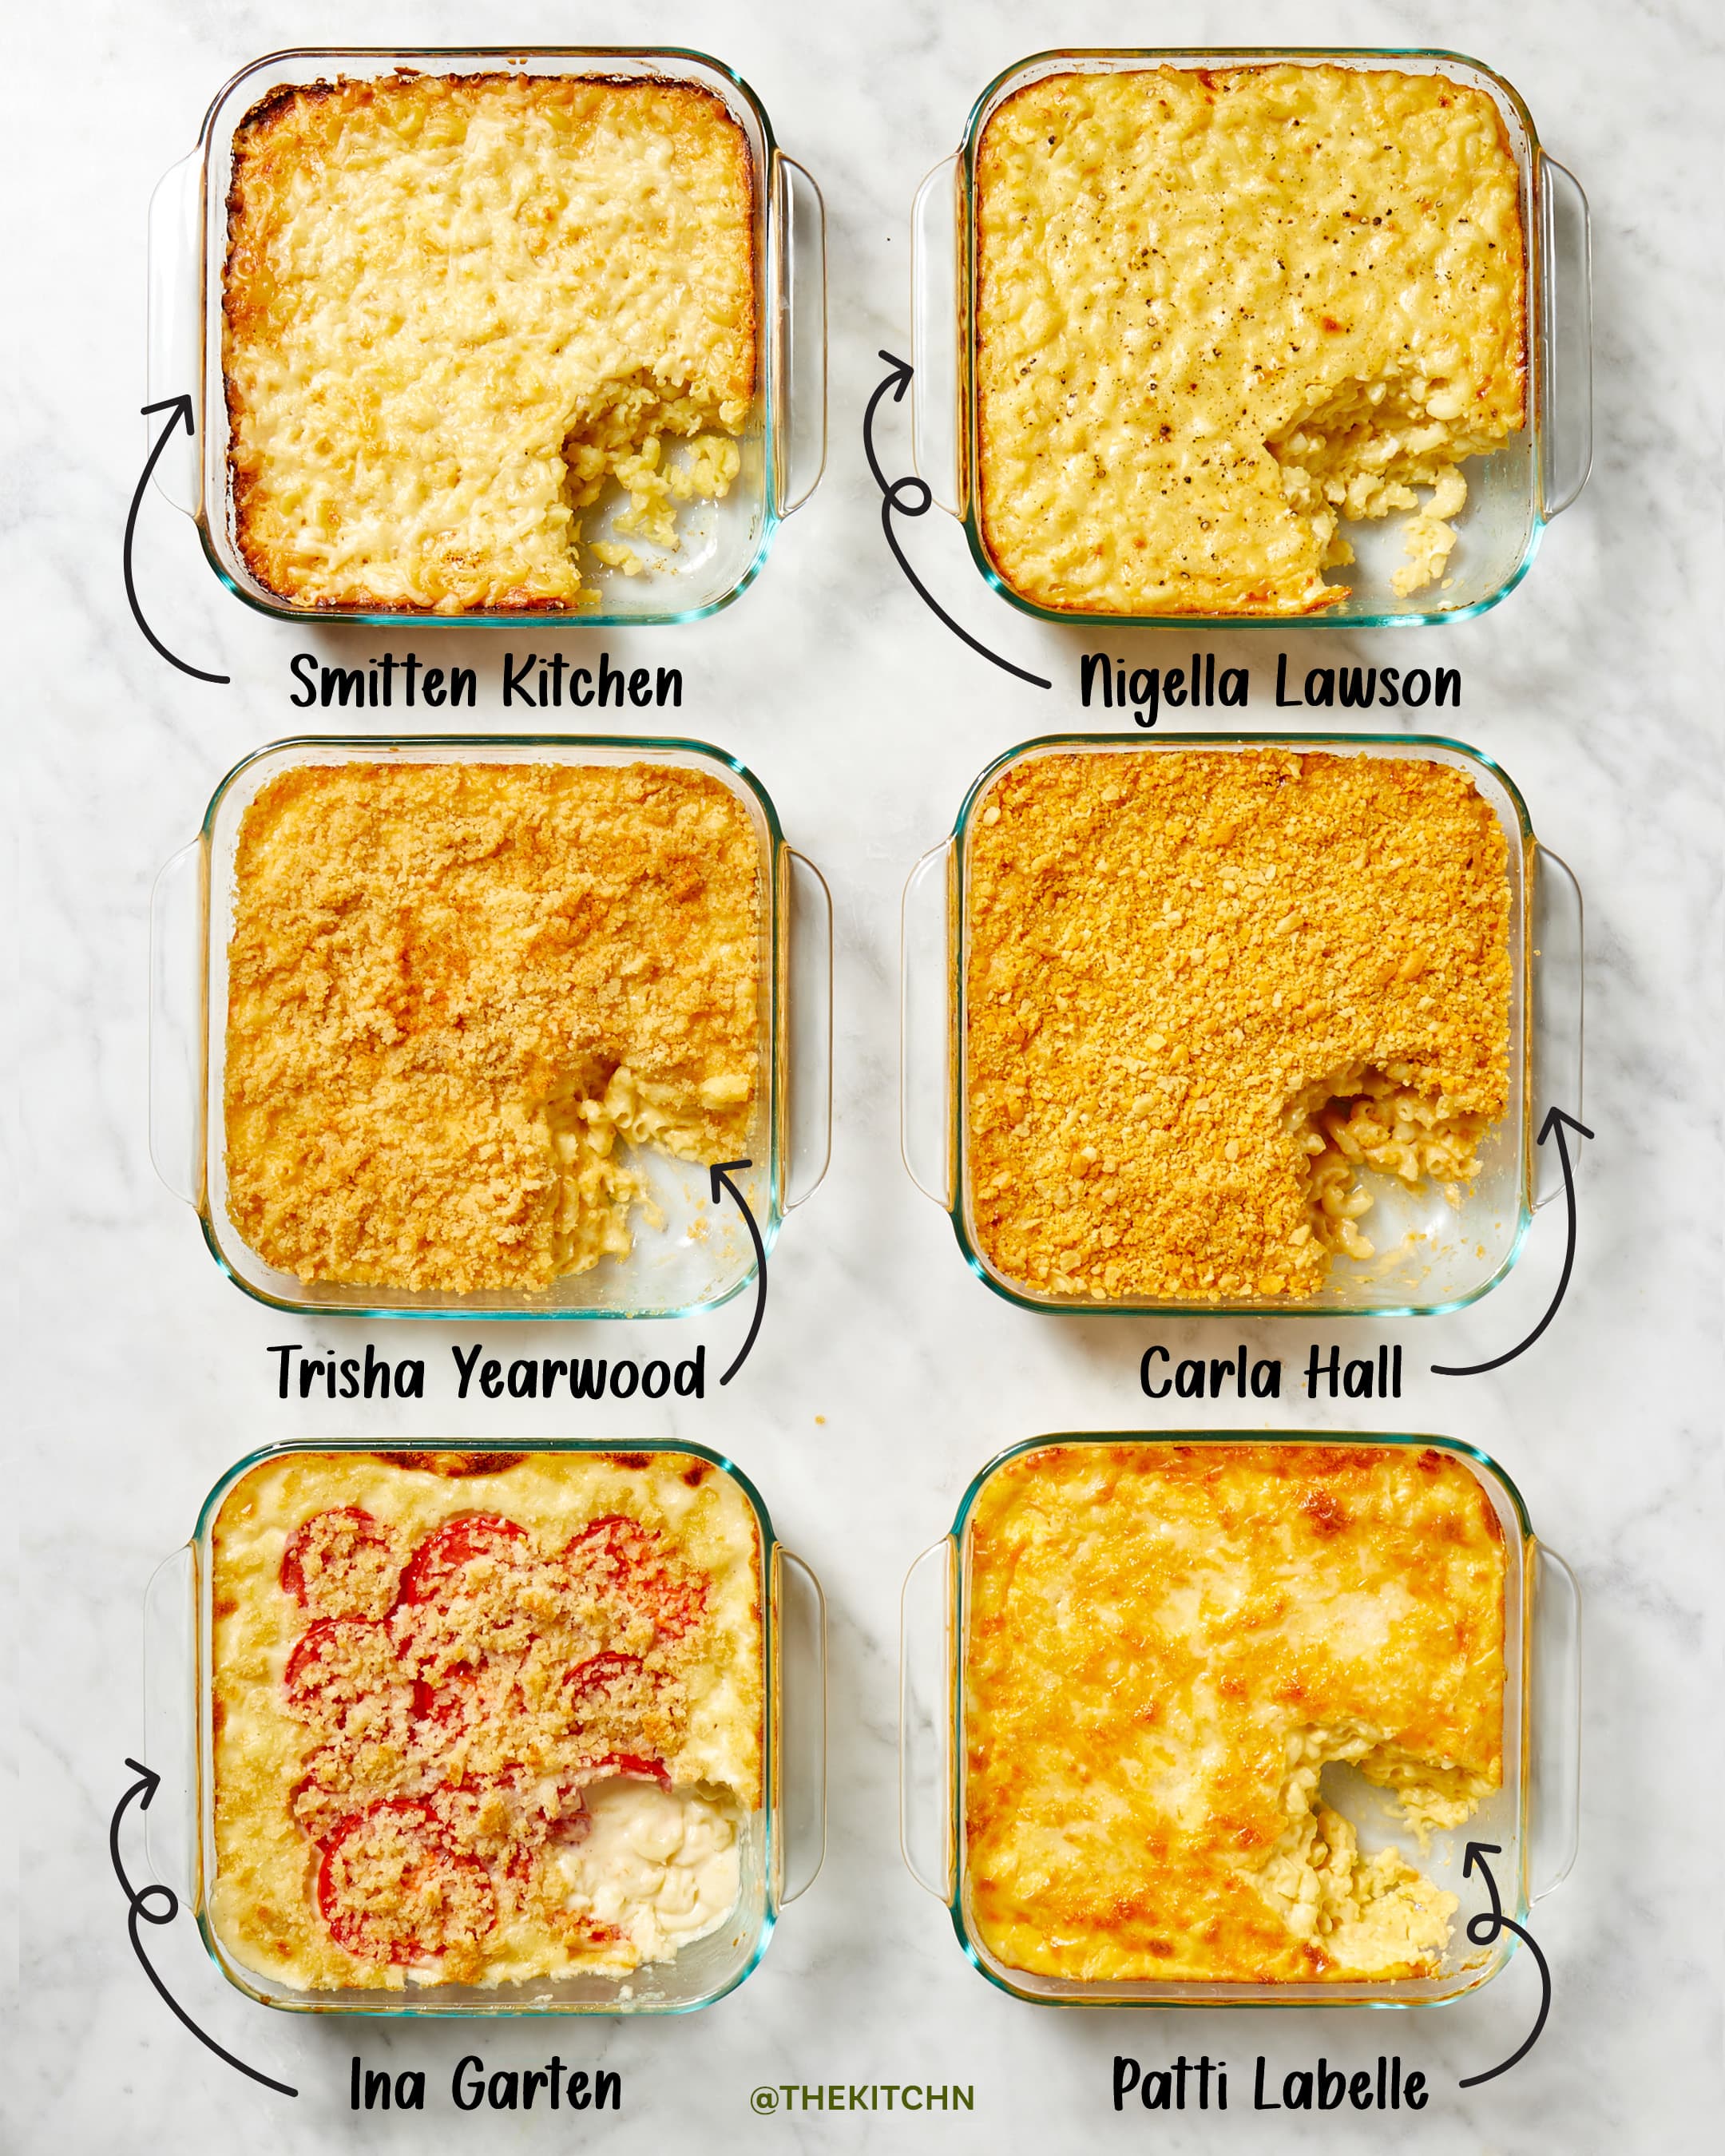 Baked Macaroni and Cheese Recipe - NYT Cooking